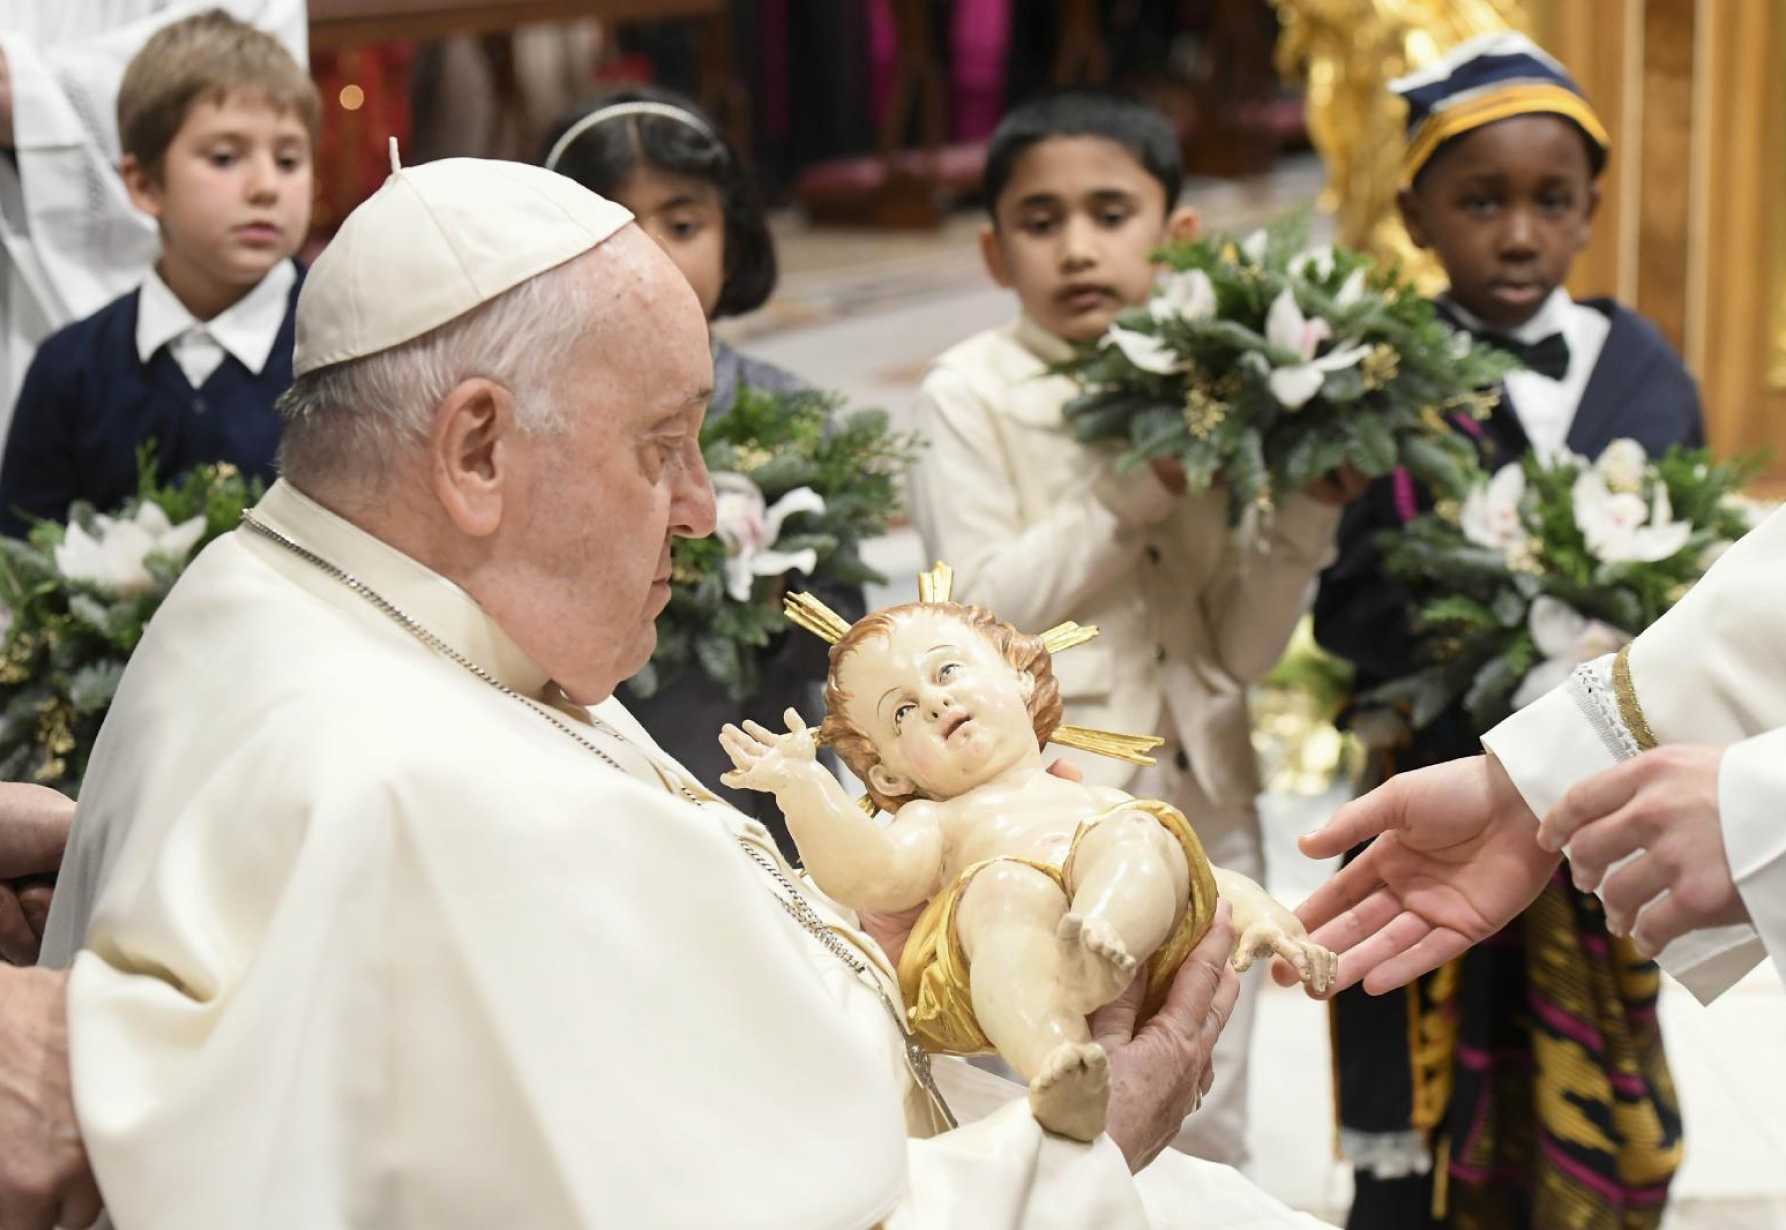 At Christmas, God shows love through 'littleness,' not power, pope says